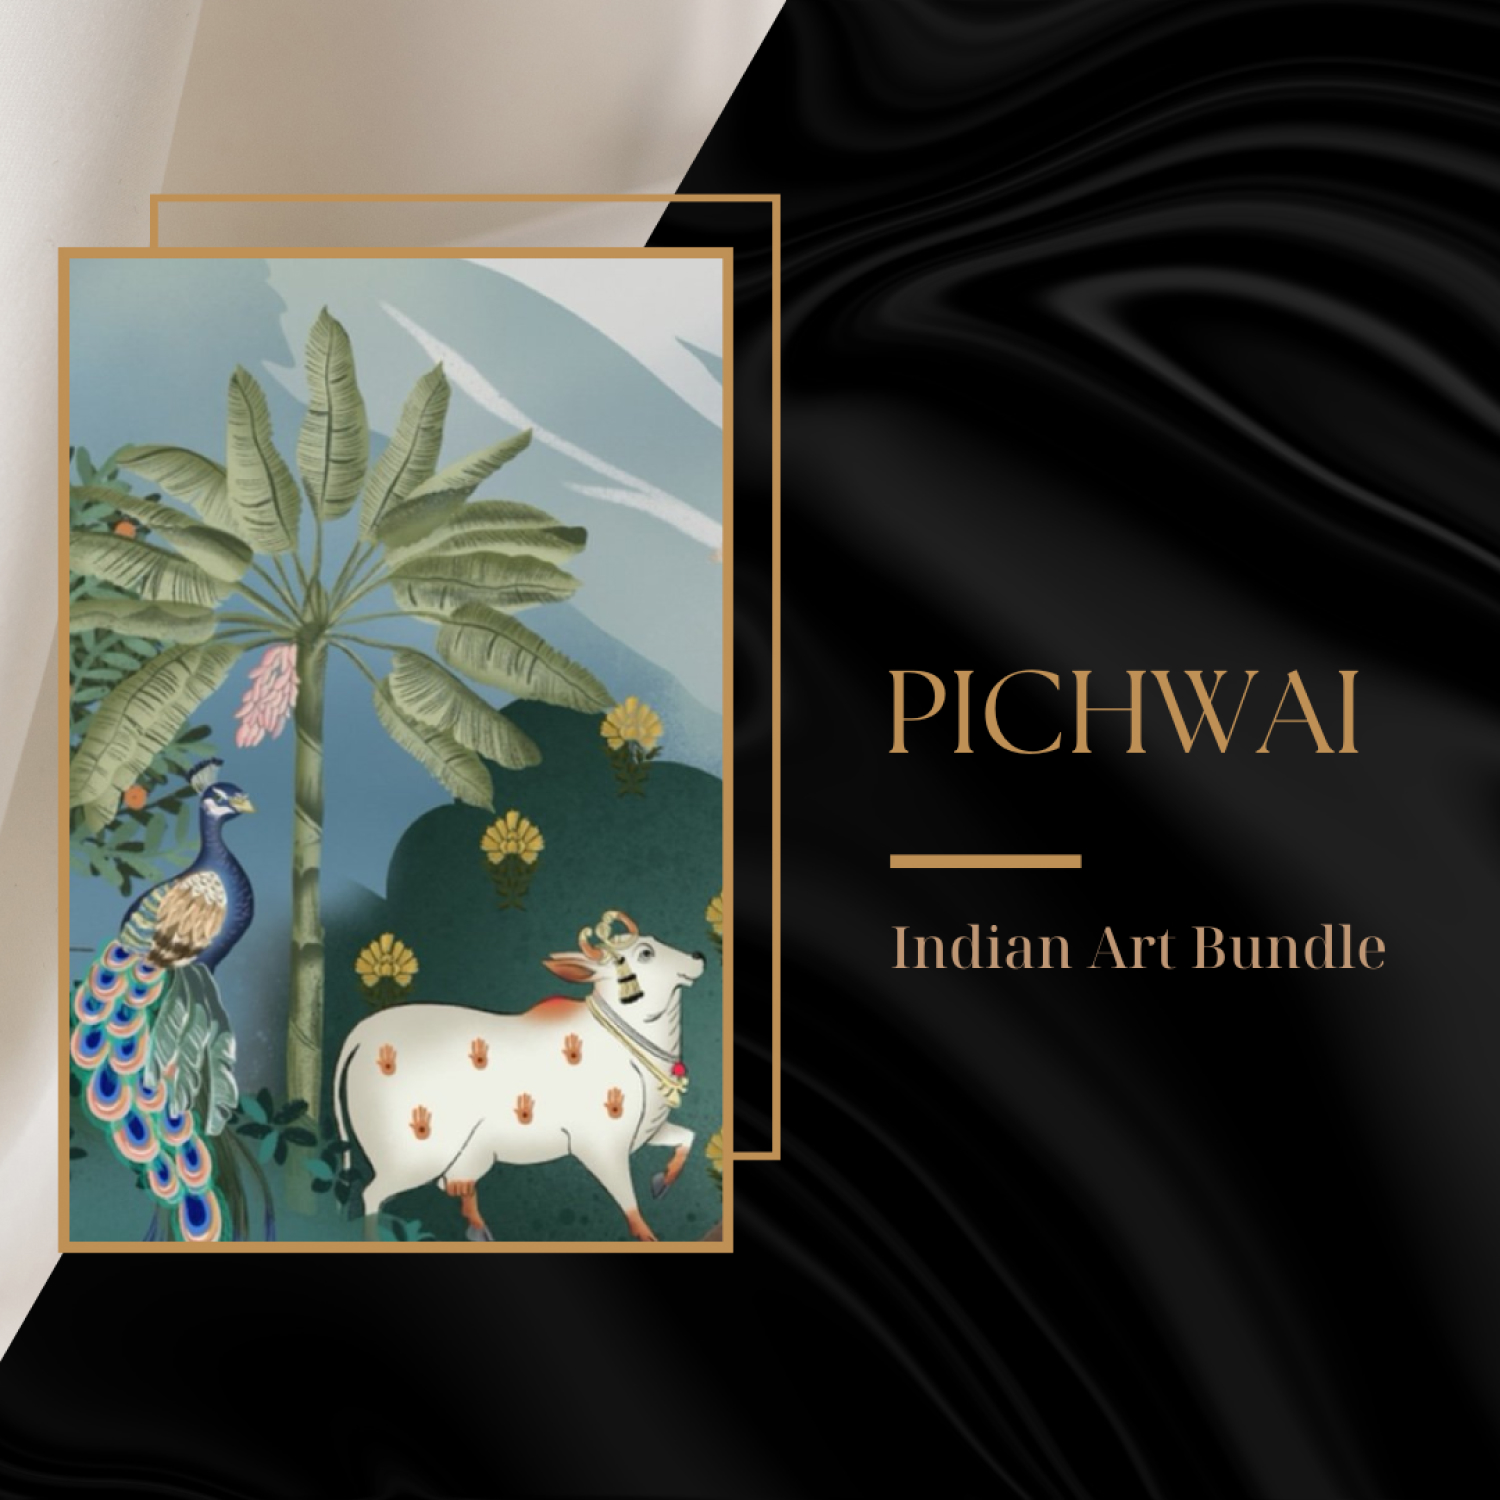 Prints of pichwai images.